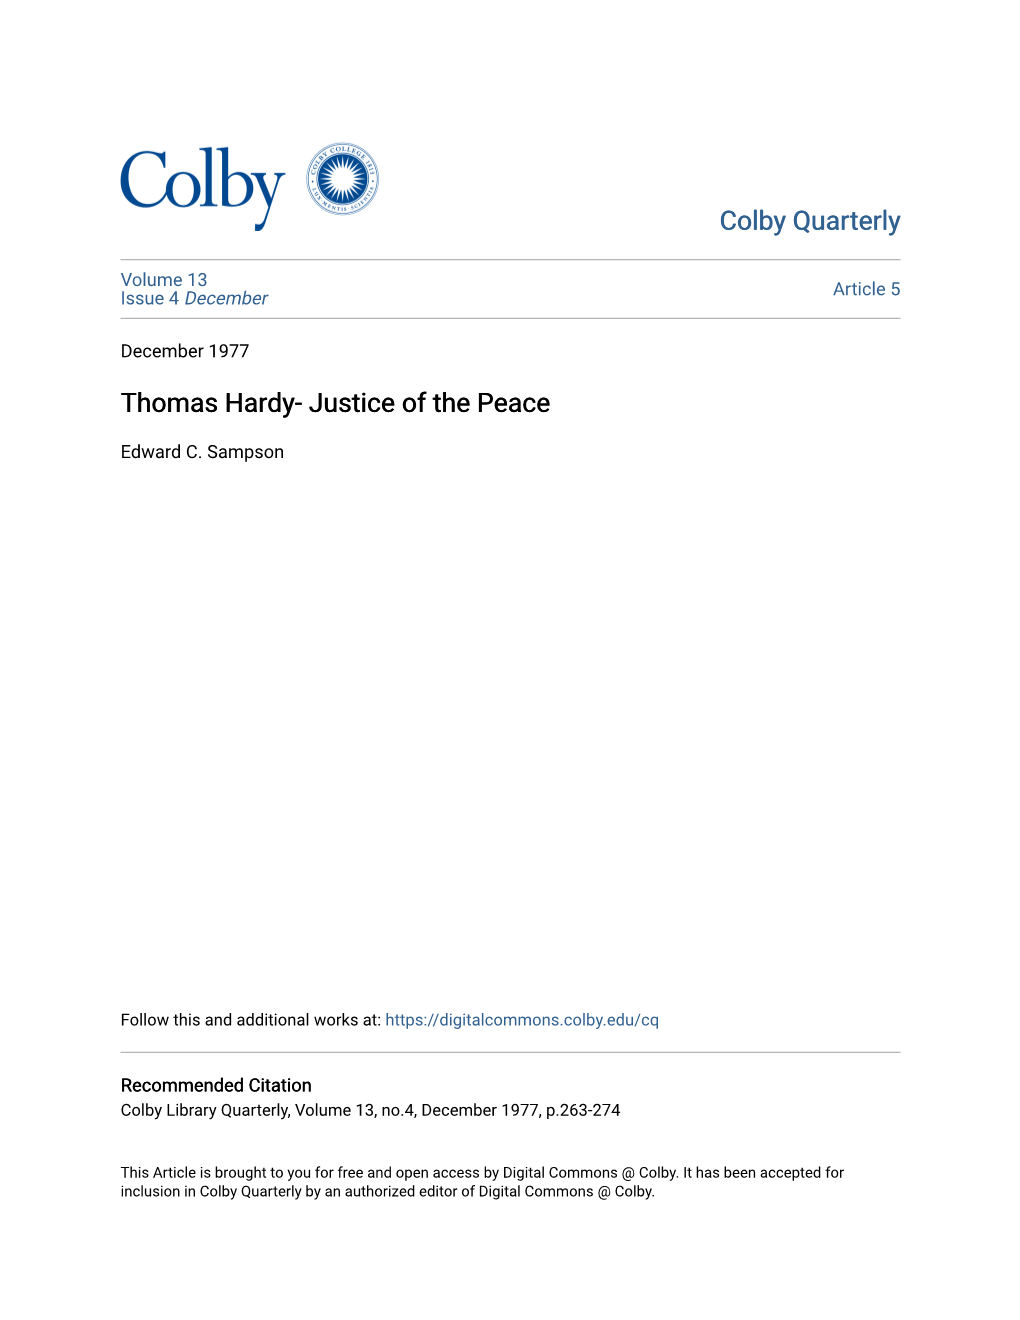 Thomas Hardy- Justice of the Peace